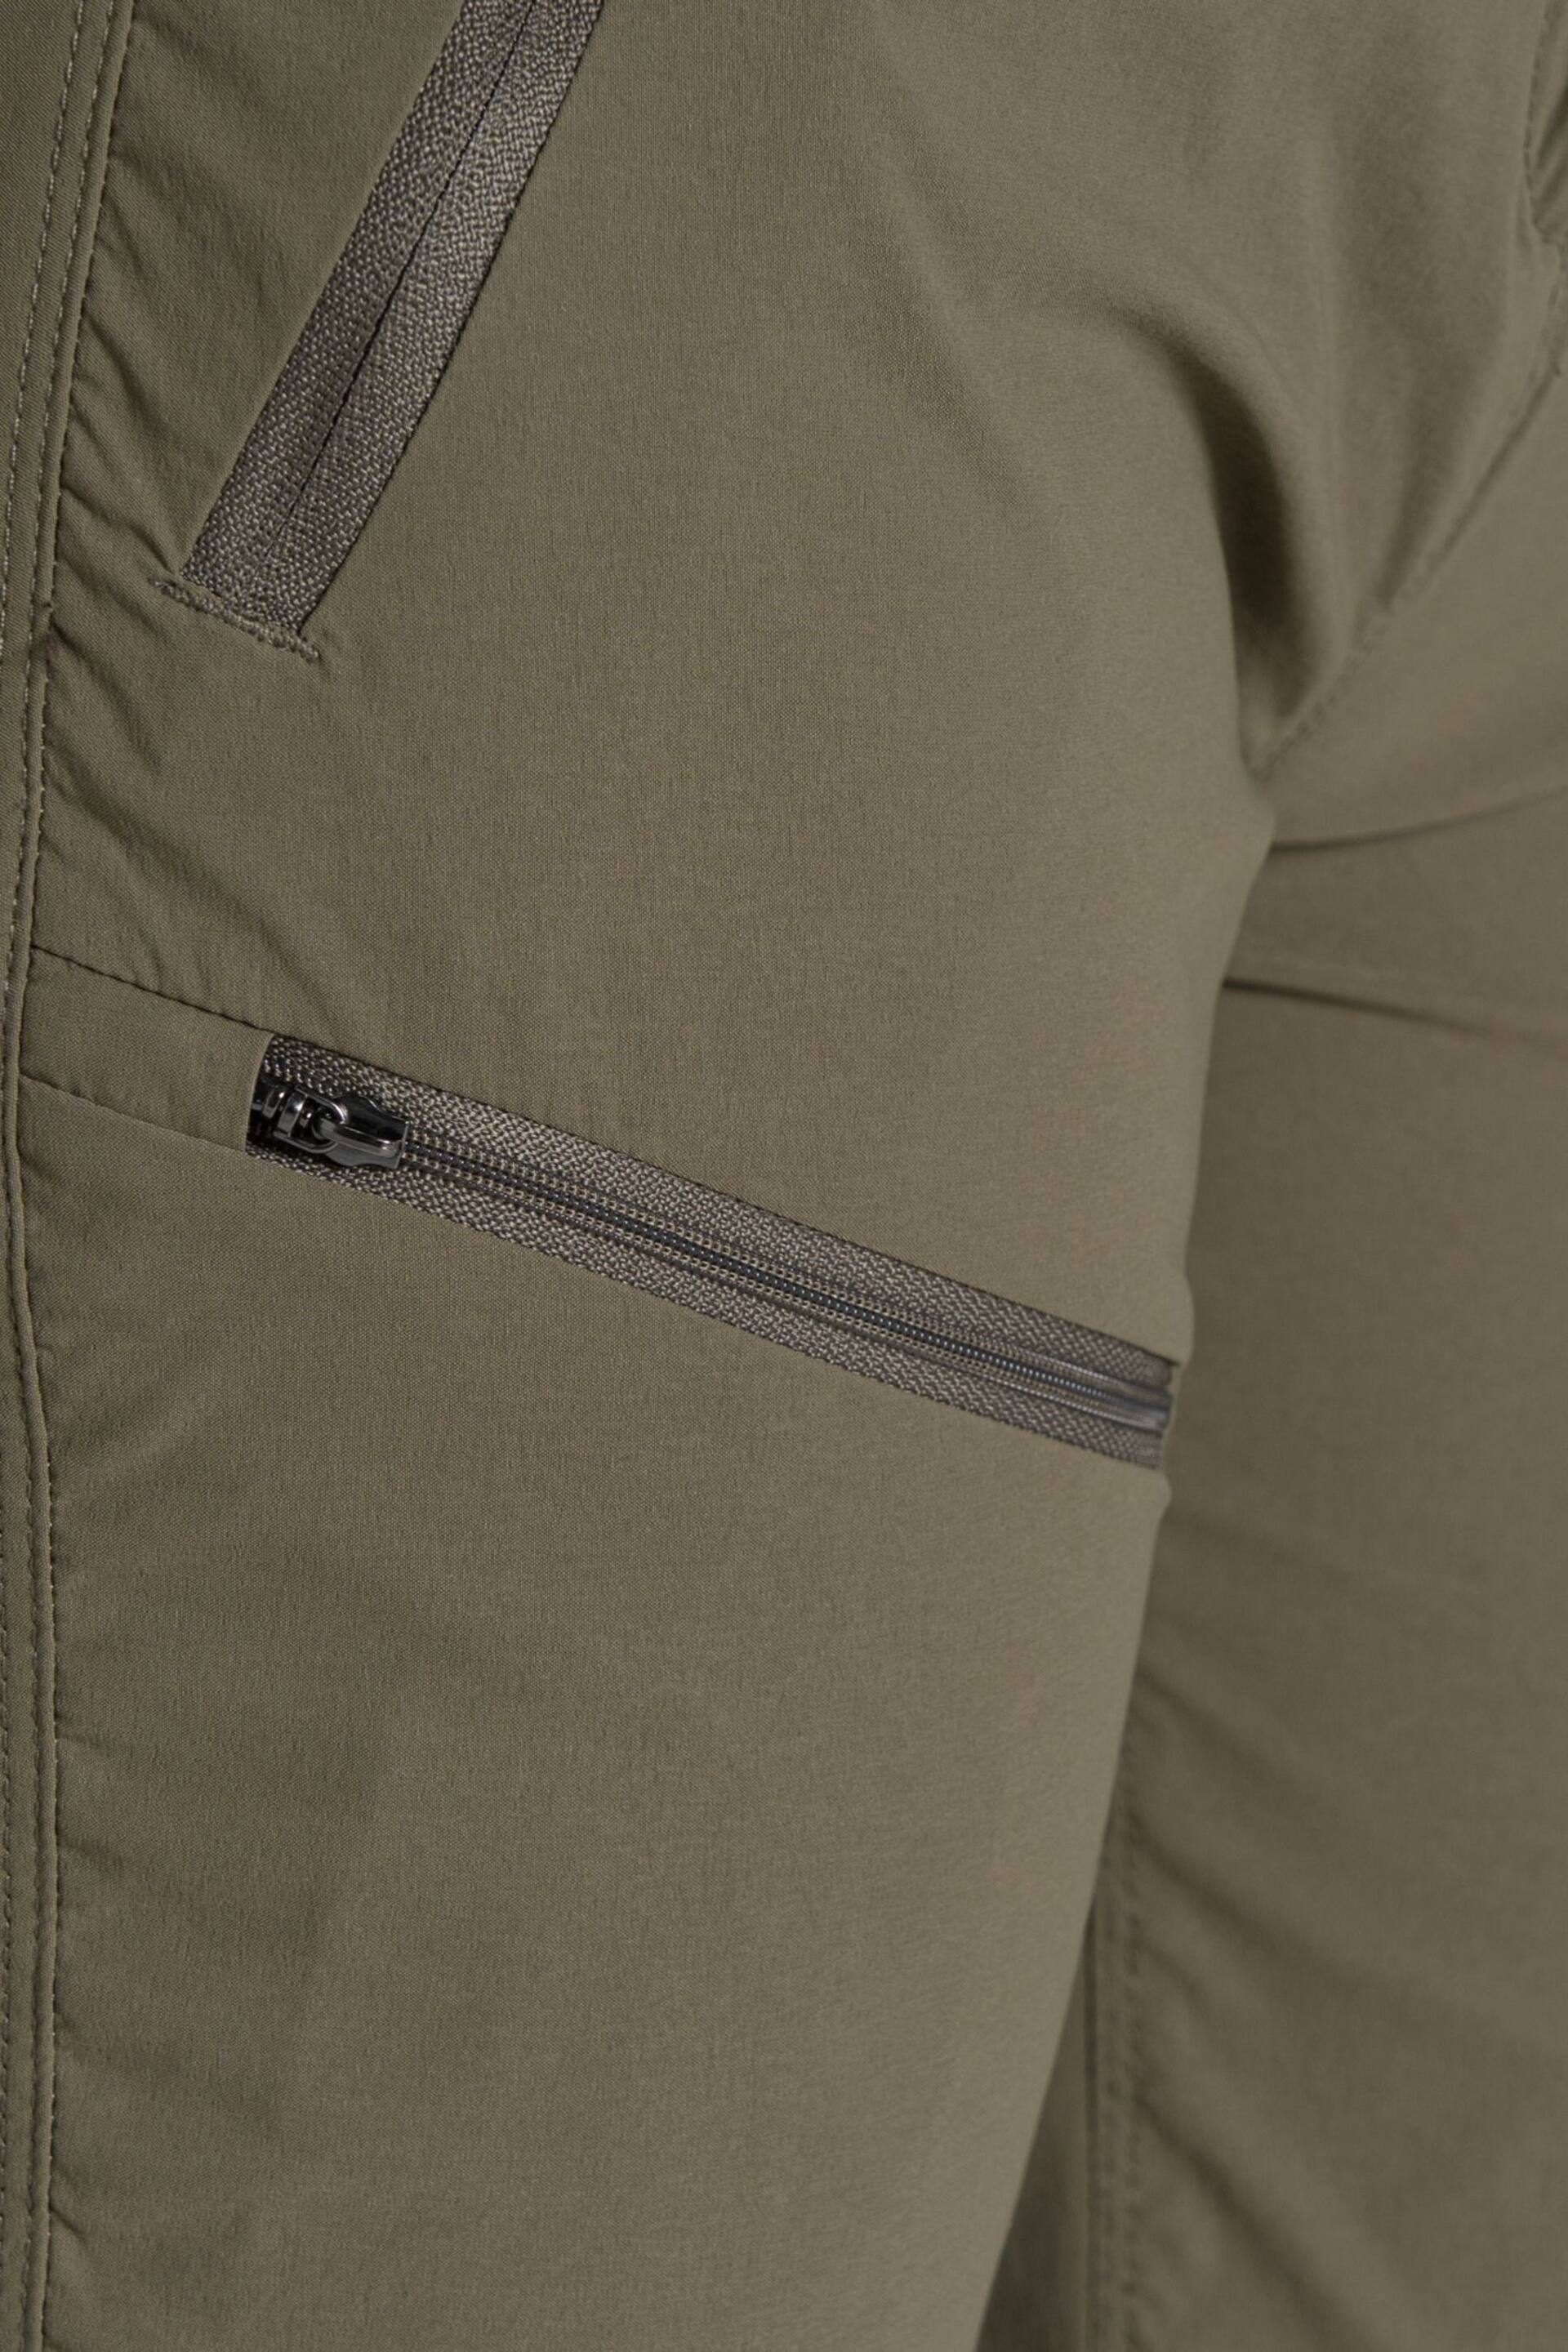 Craghoppers Green NL PRO Convertible III Trousers - Image 4 of 7